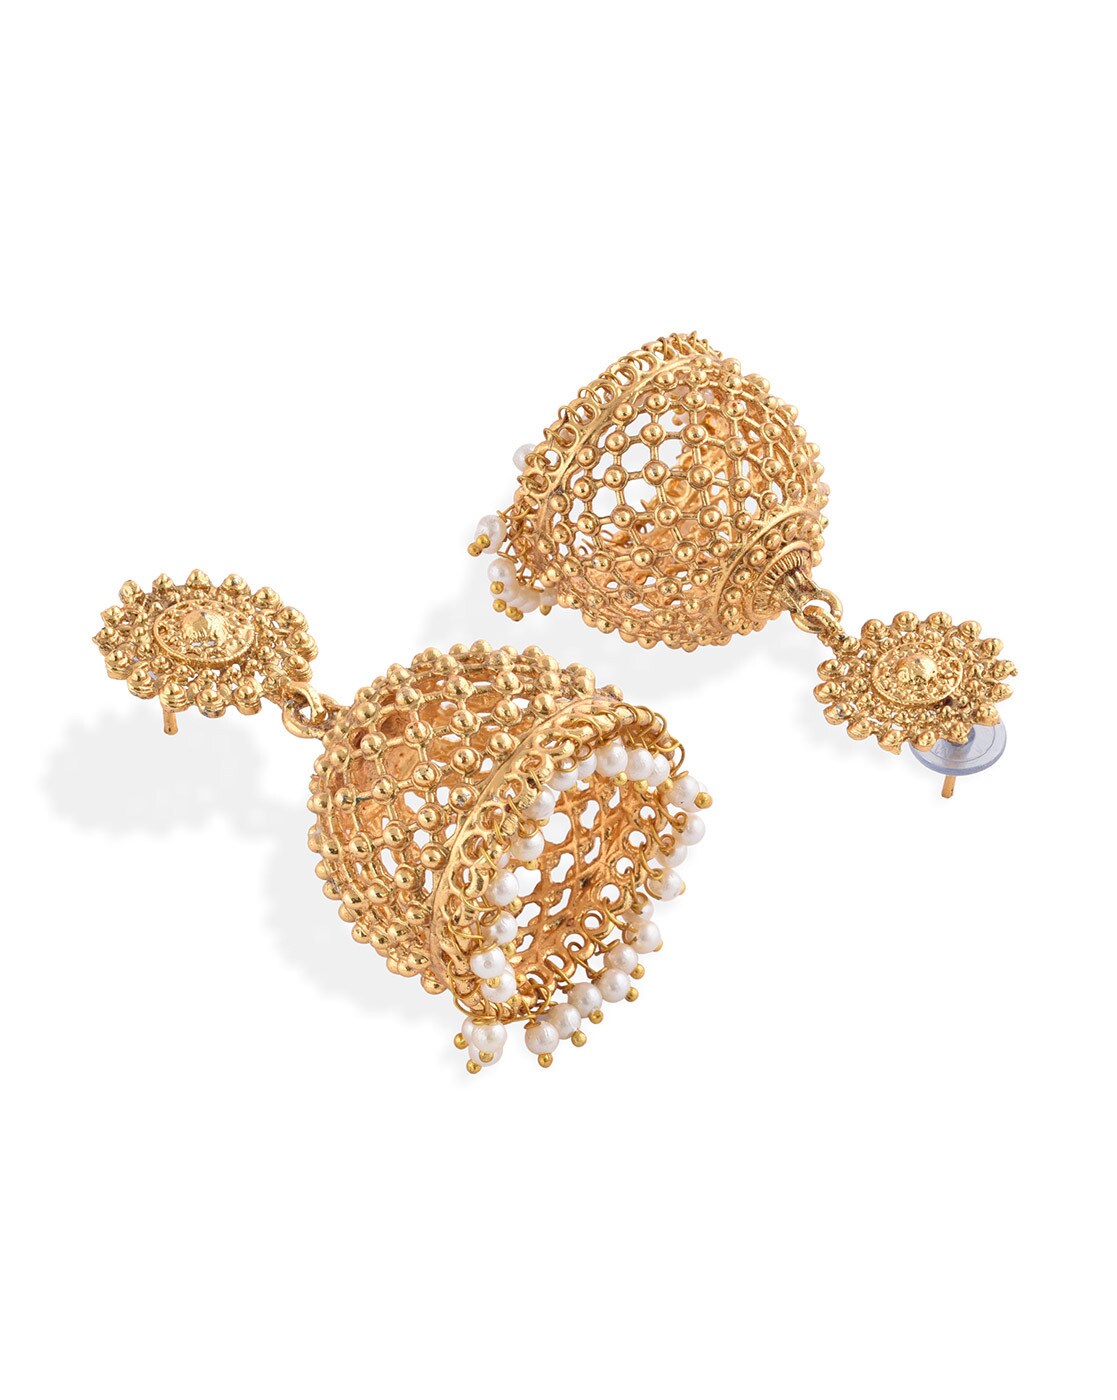 Aggregate 112+ mirraw earrings online super hot